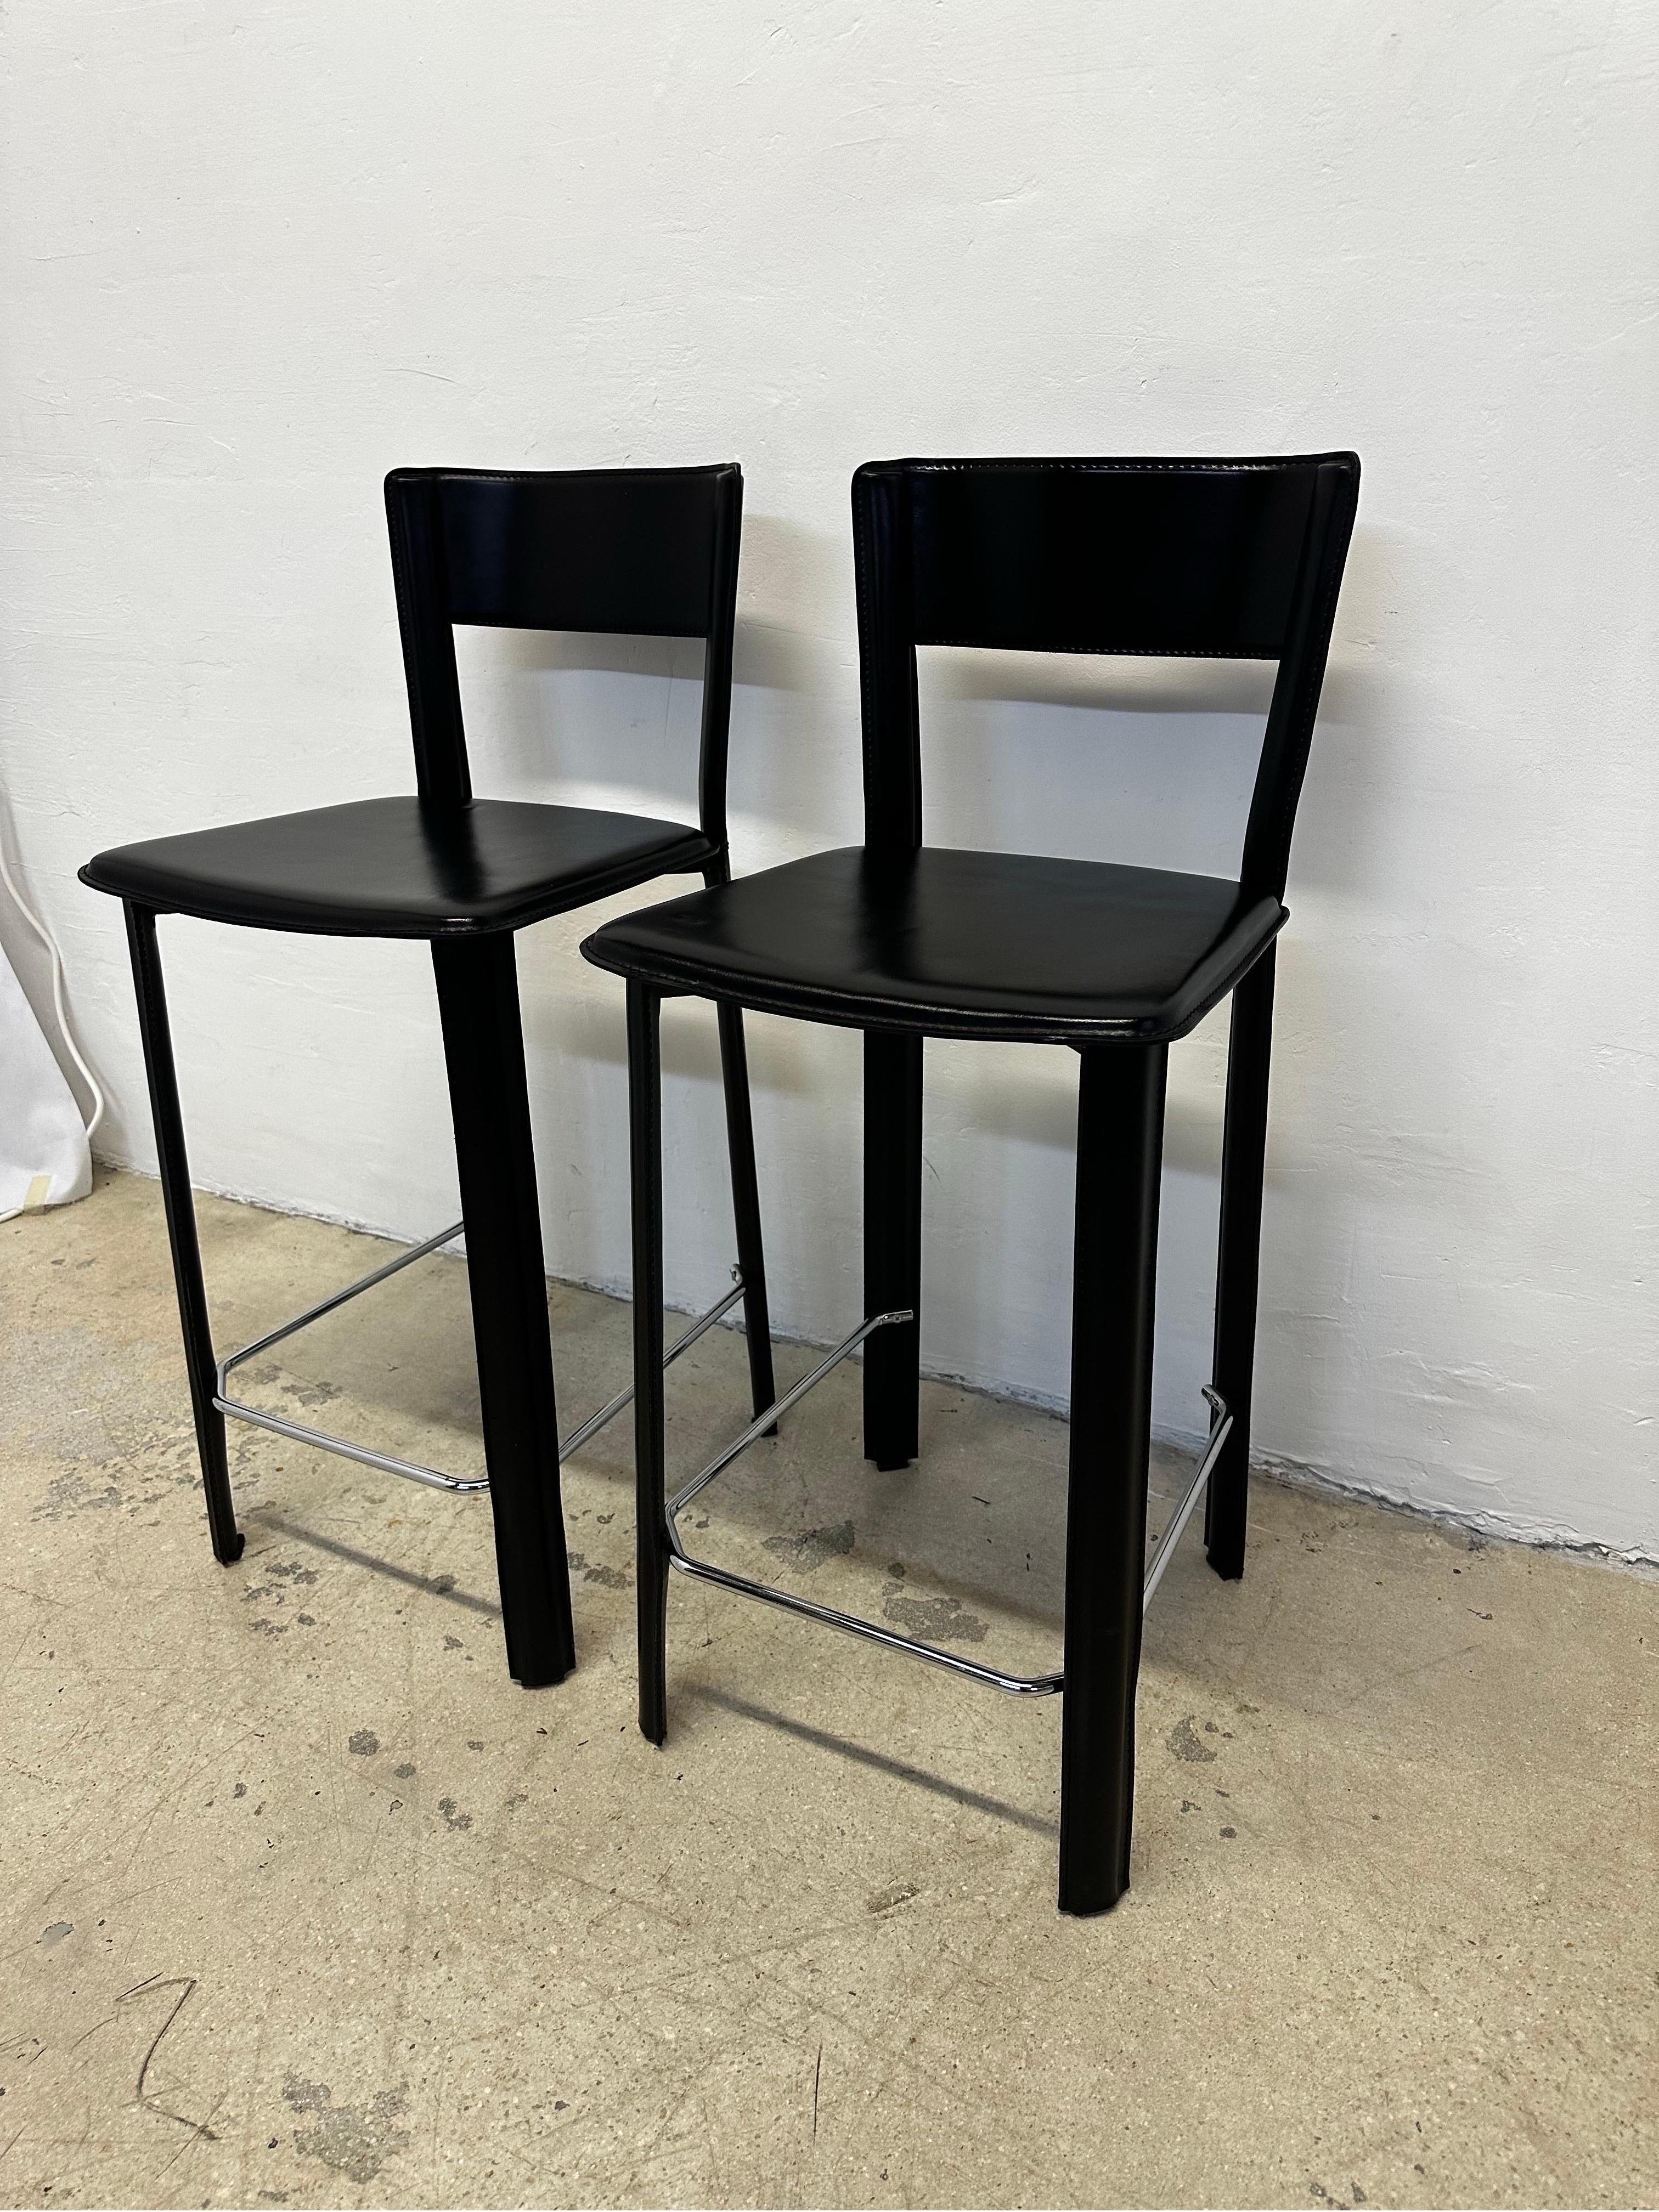 Italian Frag Italy Stitched Black Leather Counter Stools - a Pair